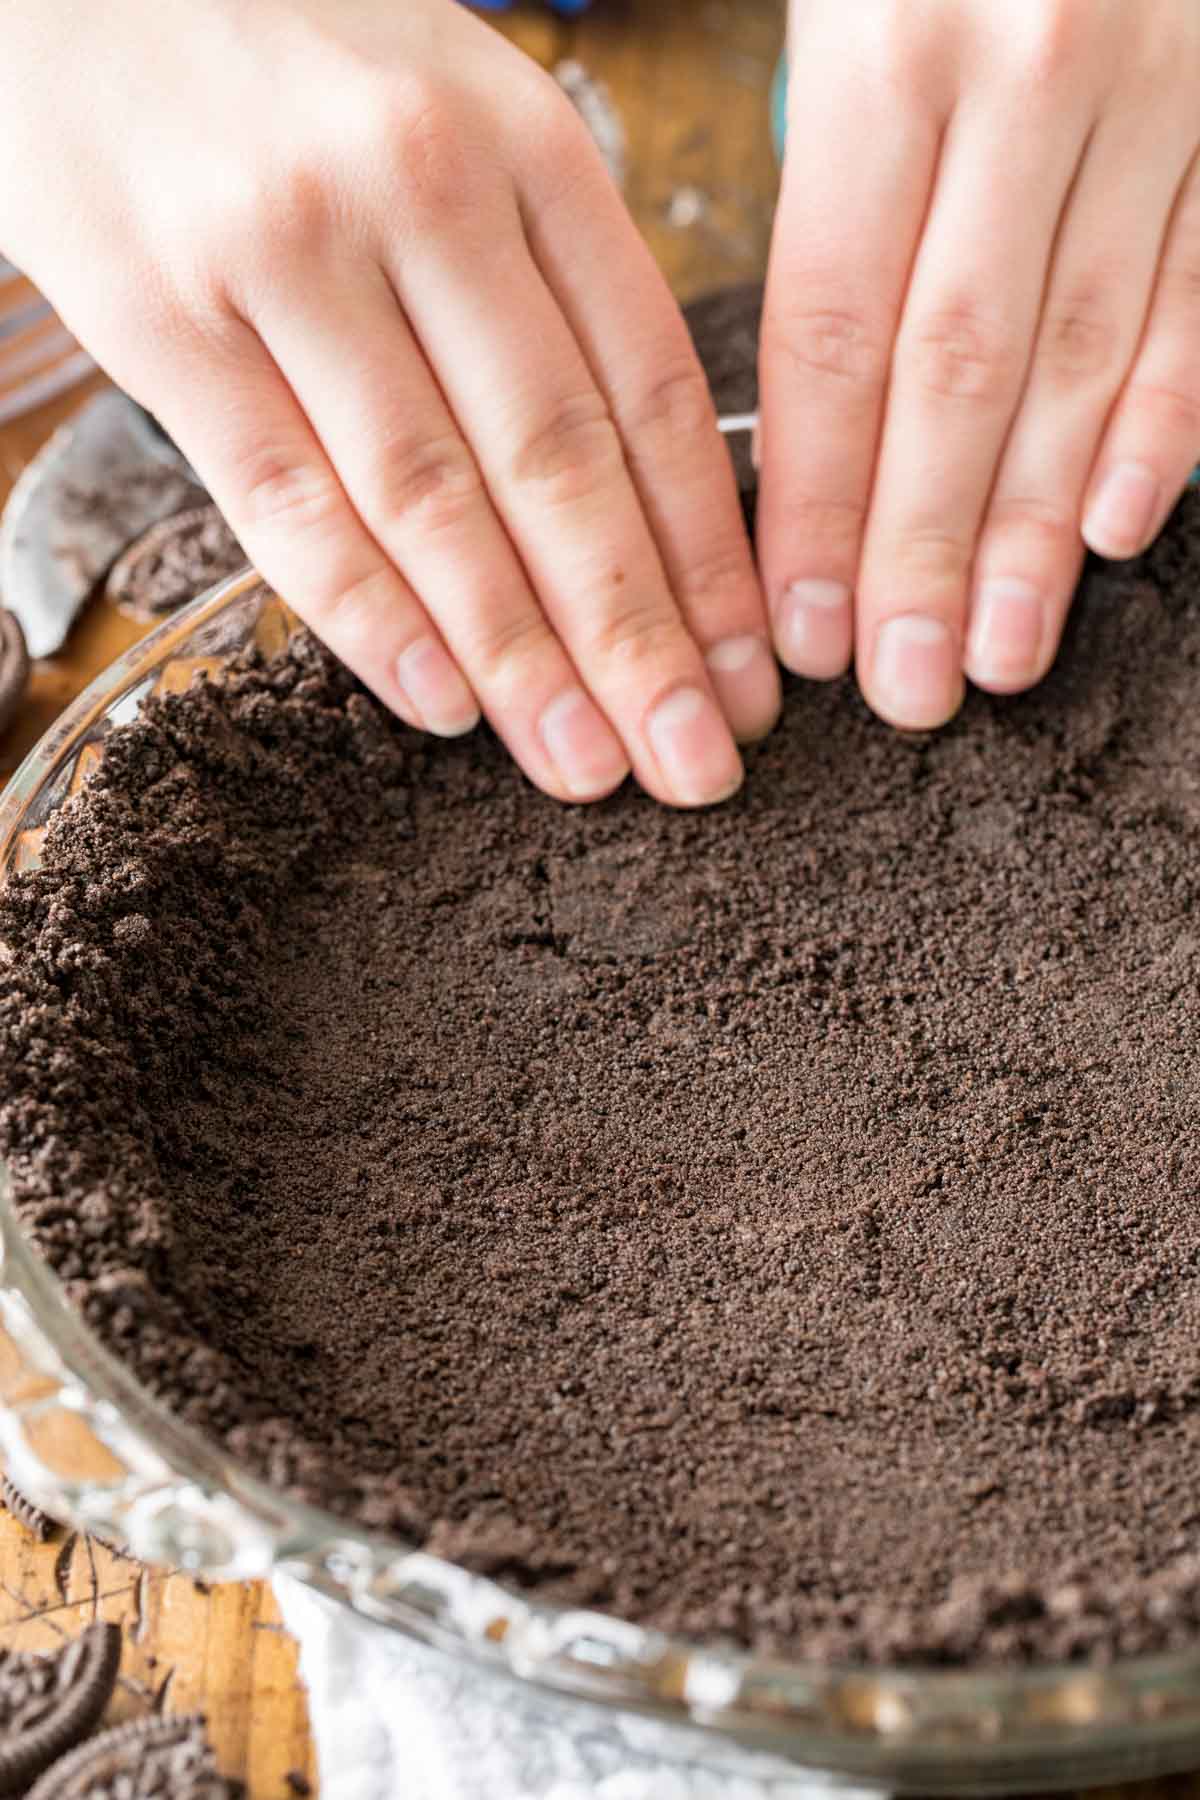 Hands pressing Oreo crumbs into a pie plate.